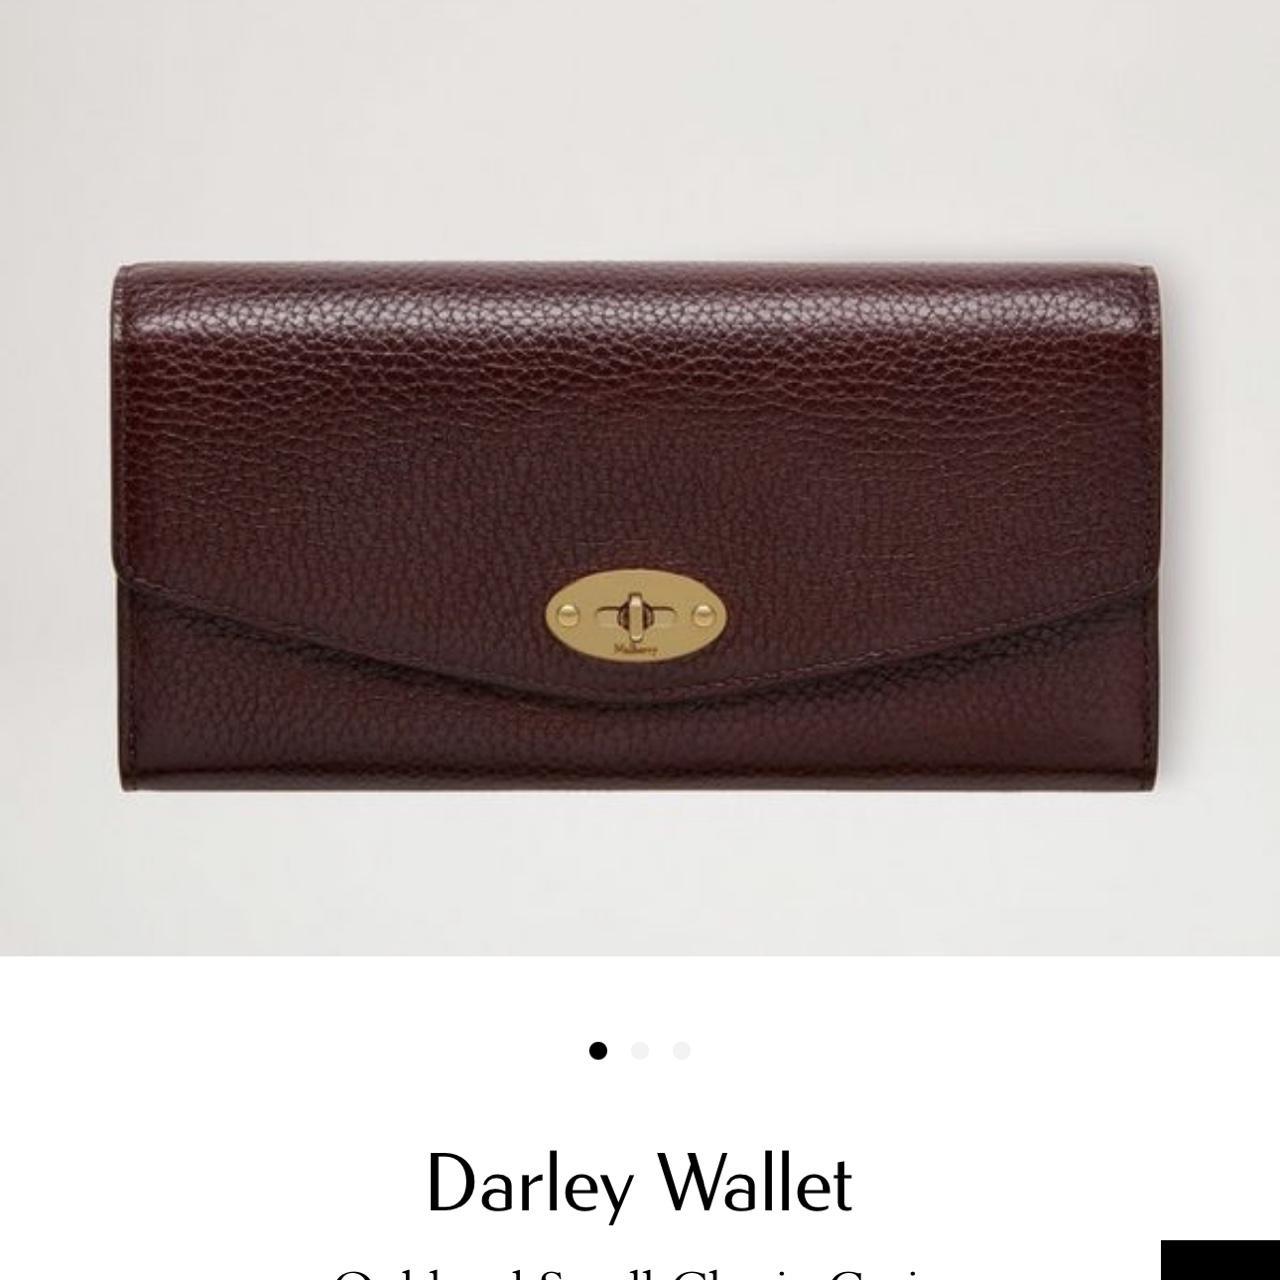 Mulberry Darley wallet in ‘Oxblood’ , Perfect